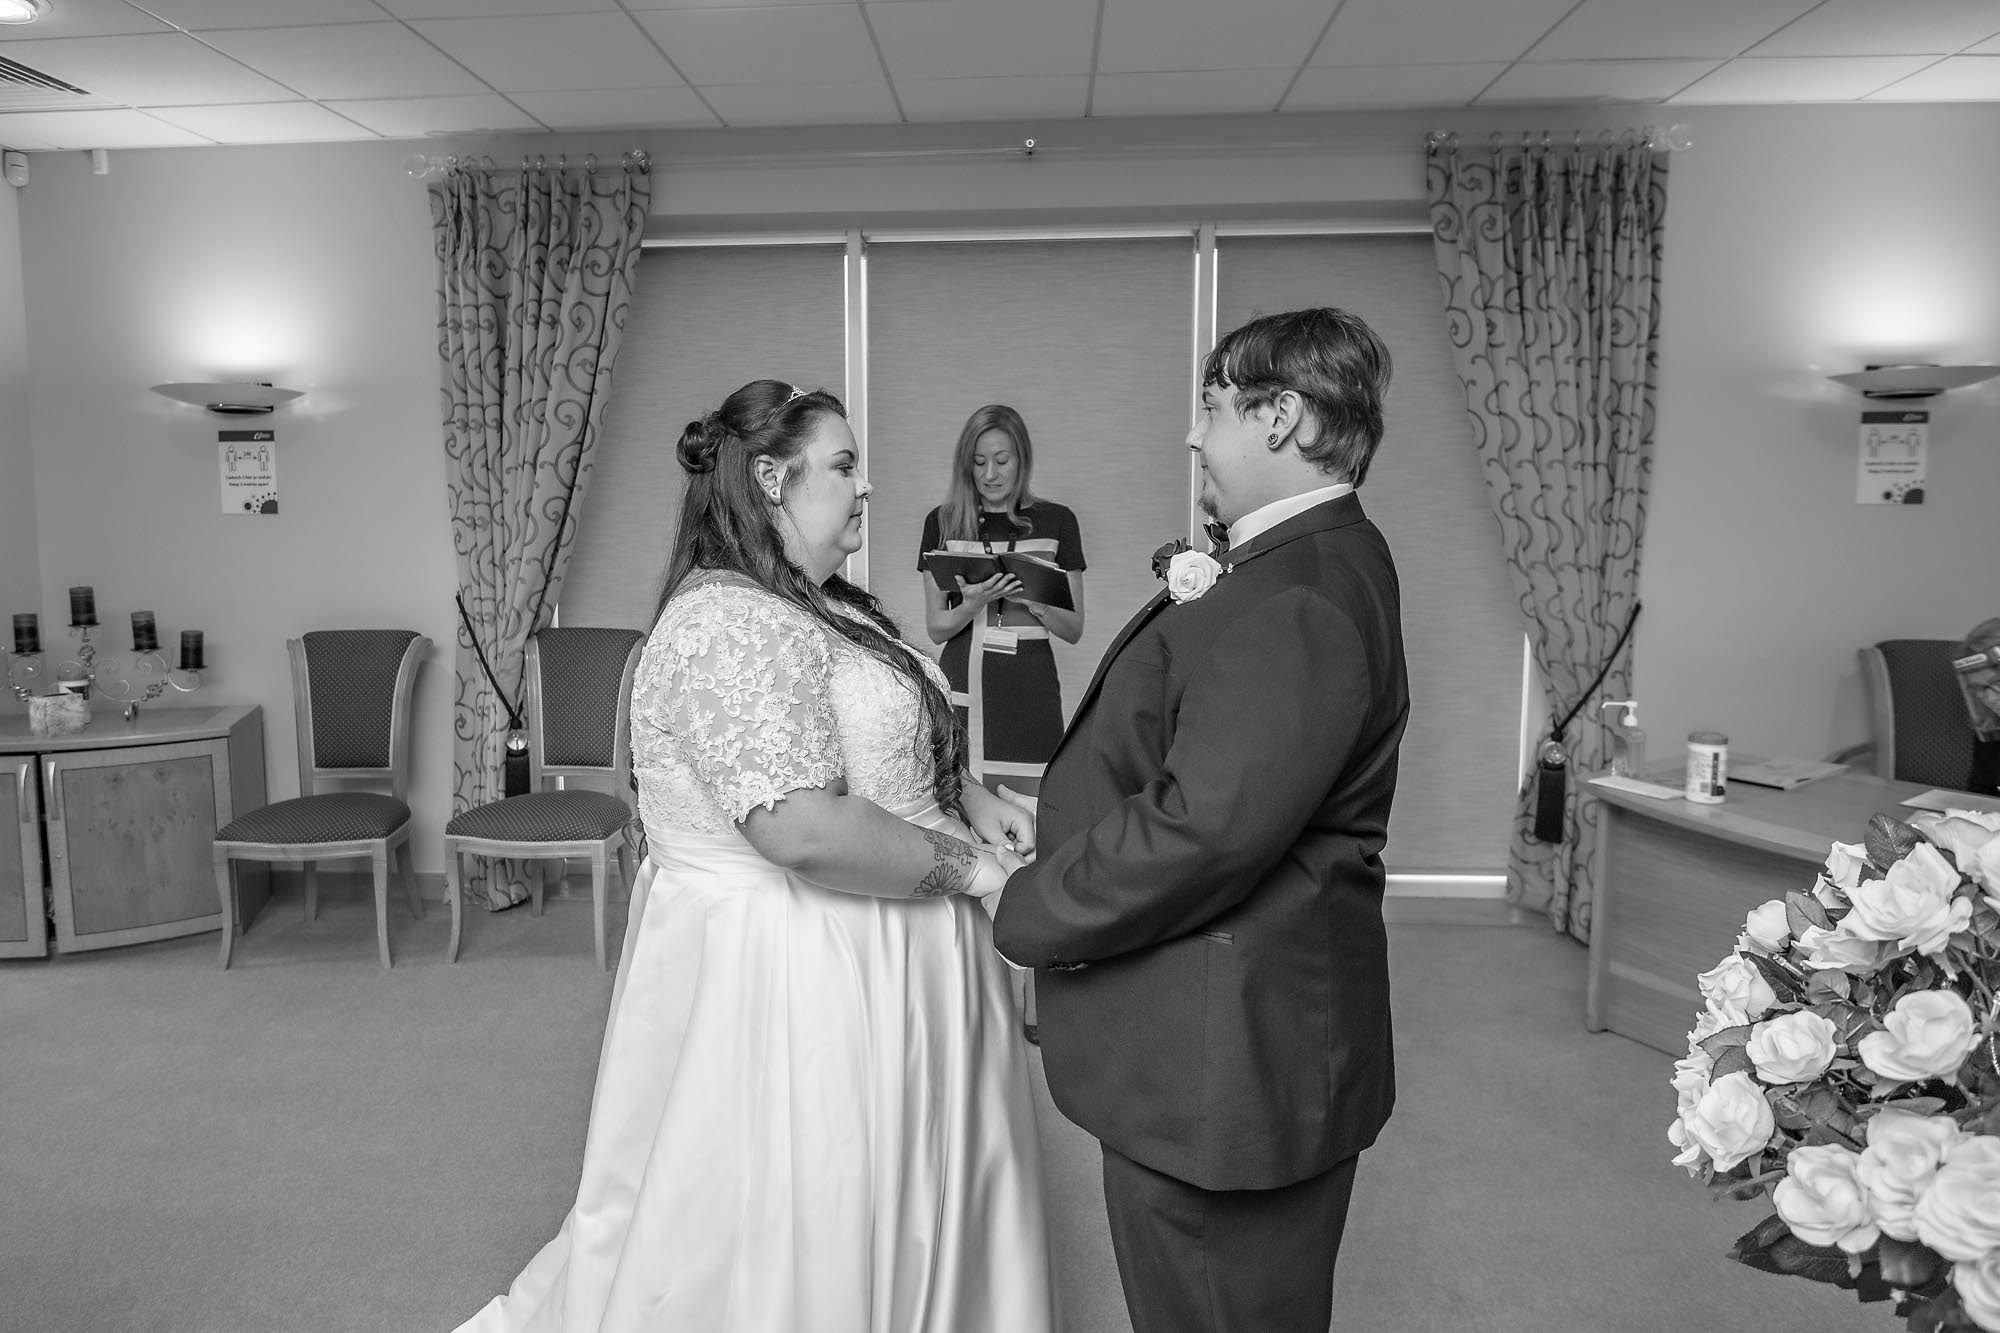 The bride and groom hold each others hands at their wedding ceremony in Caerphilly Register Office